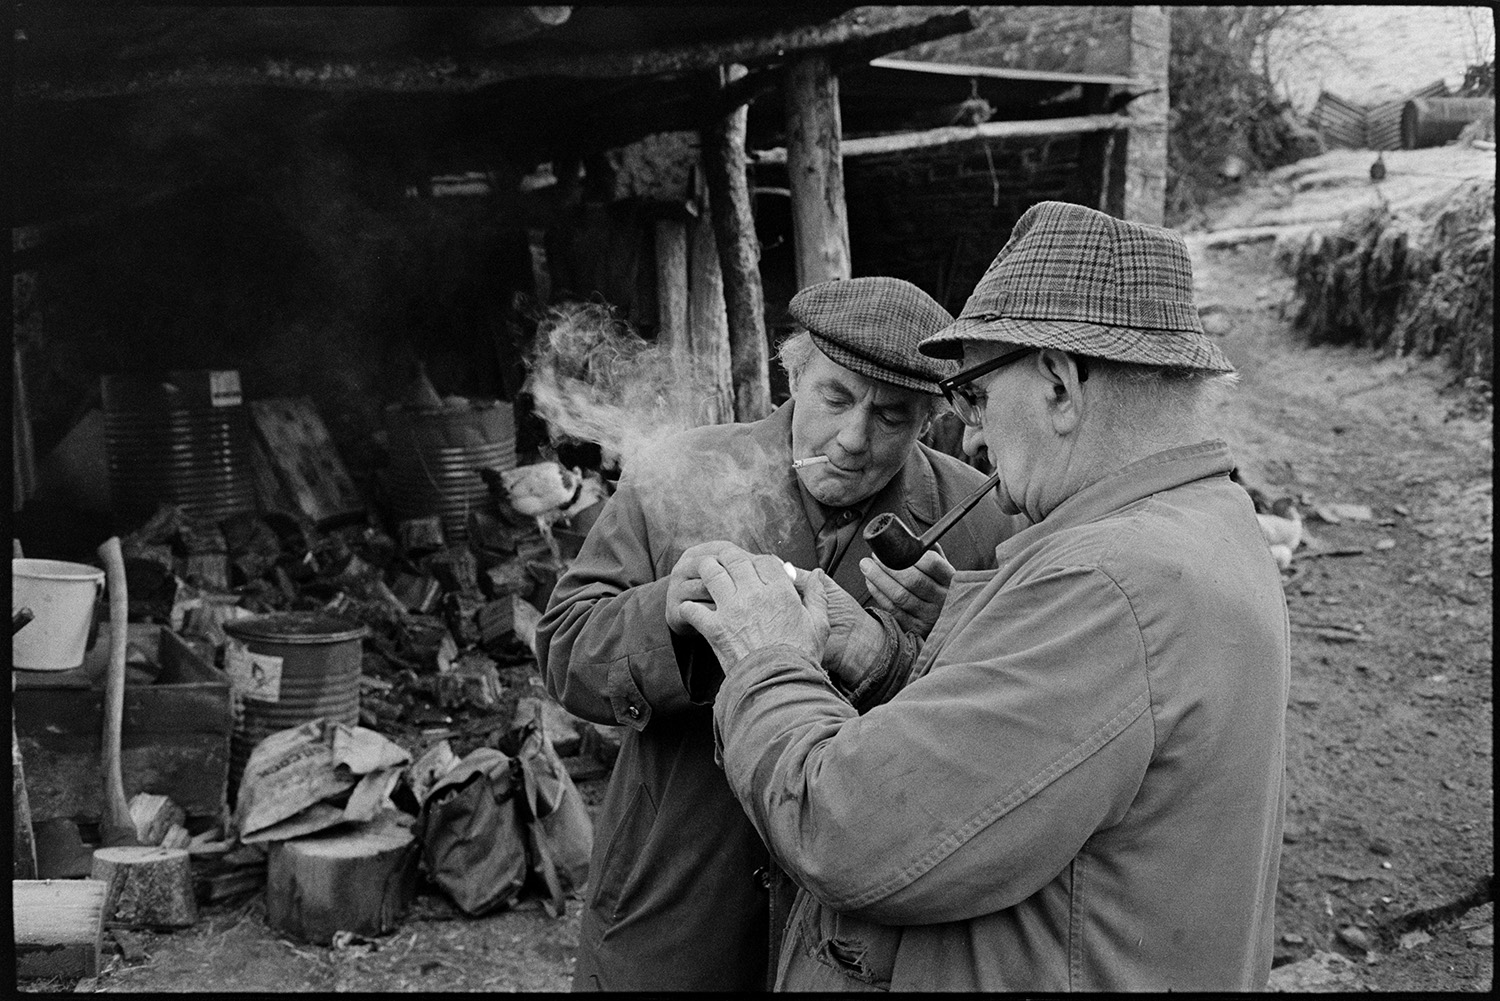 Wooden sheds with two farmers.
[Archie Parkhouse and Ivor Brock at Millhams, Dolton sharing a flame to light a cigarette and pipe. They are standing in front of a wooden open fronted shed containing equipment, storage drums, an axe and logs.]